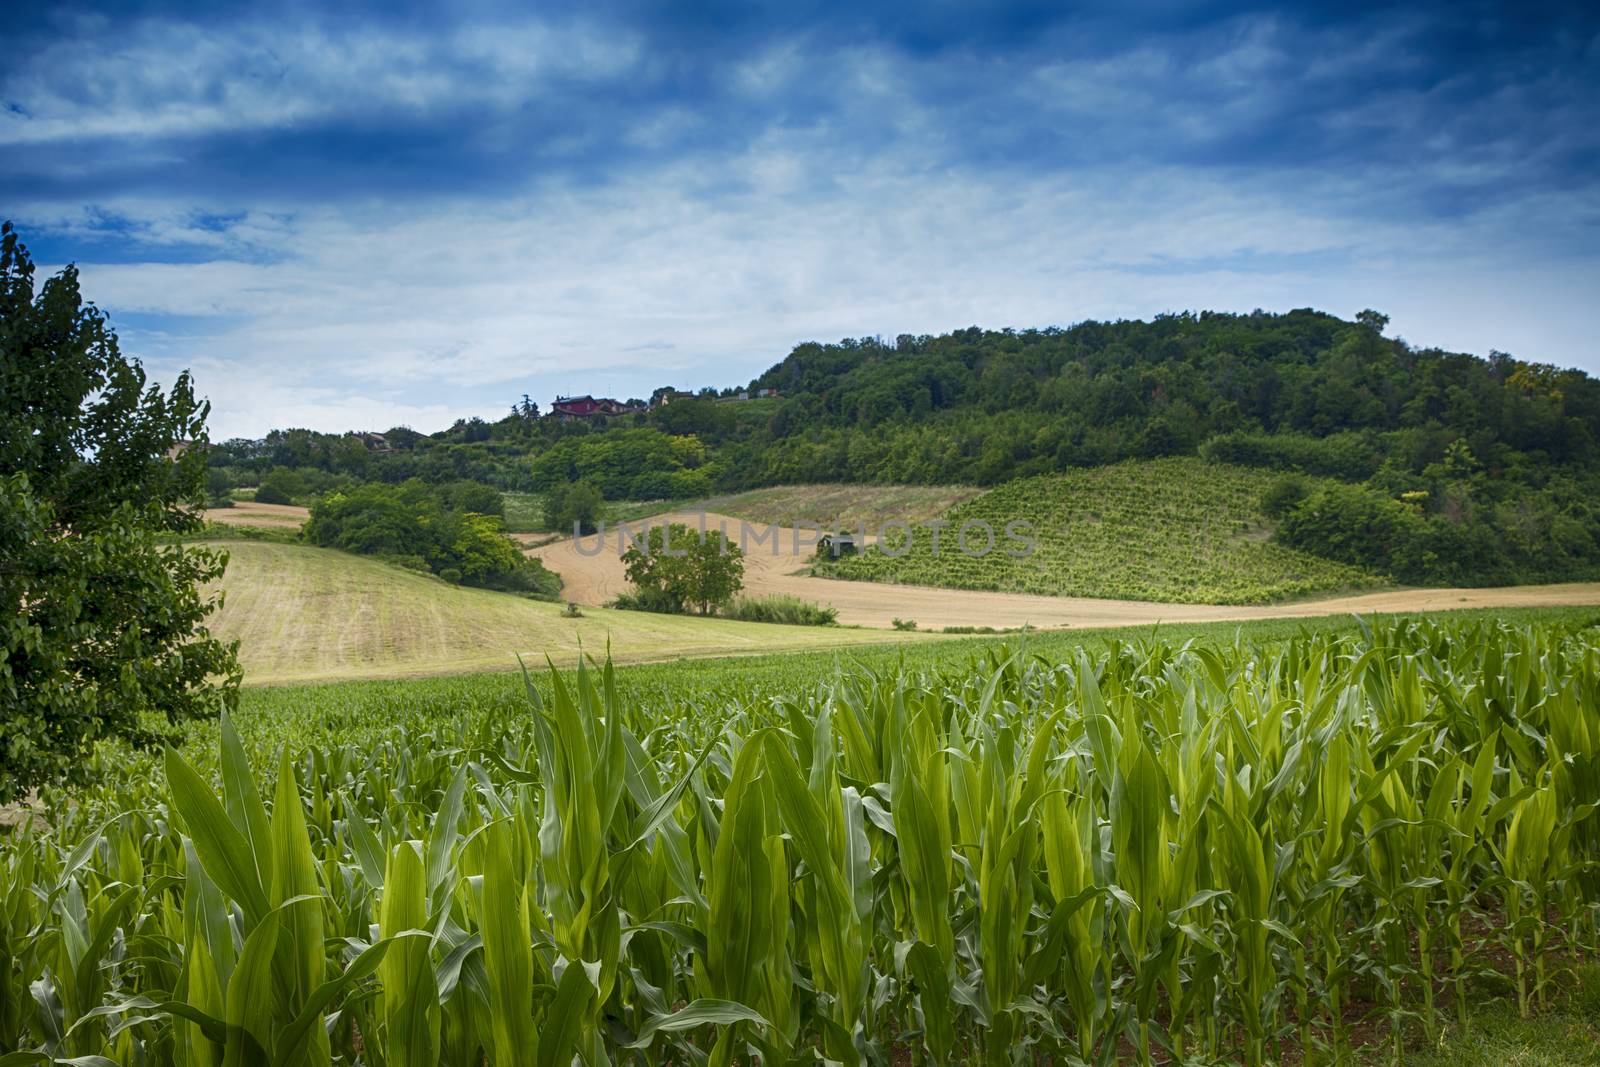 Corn field with hills under dramatic blue sky, hdr image